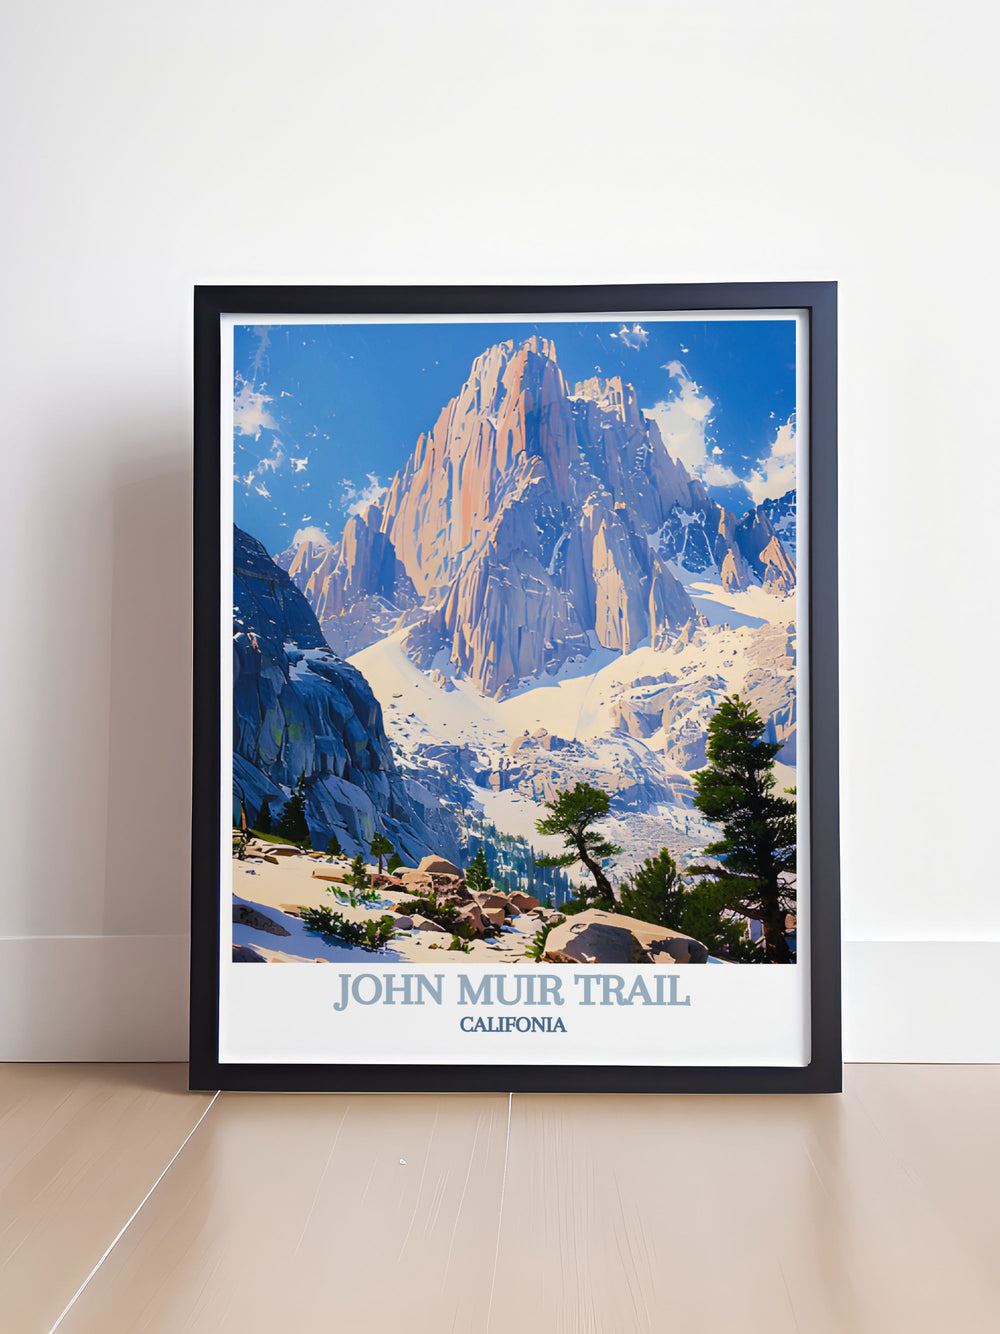 Capture the adventure of the John Muir Trail, known for its breathtaking views and challenging terrain. Perfect for hikers and nature lovers, this artwork highlights the rugged beauty of the Sierra Nevada.